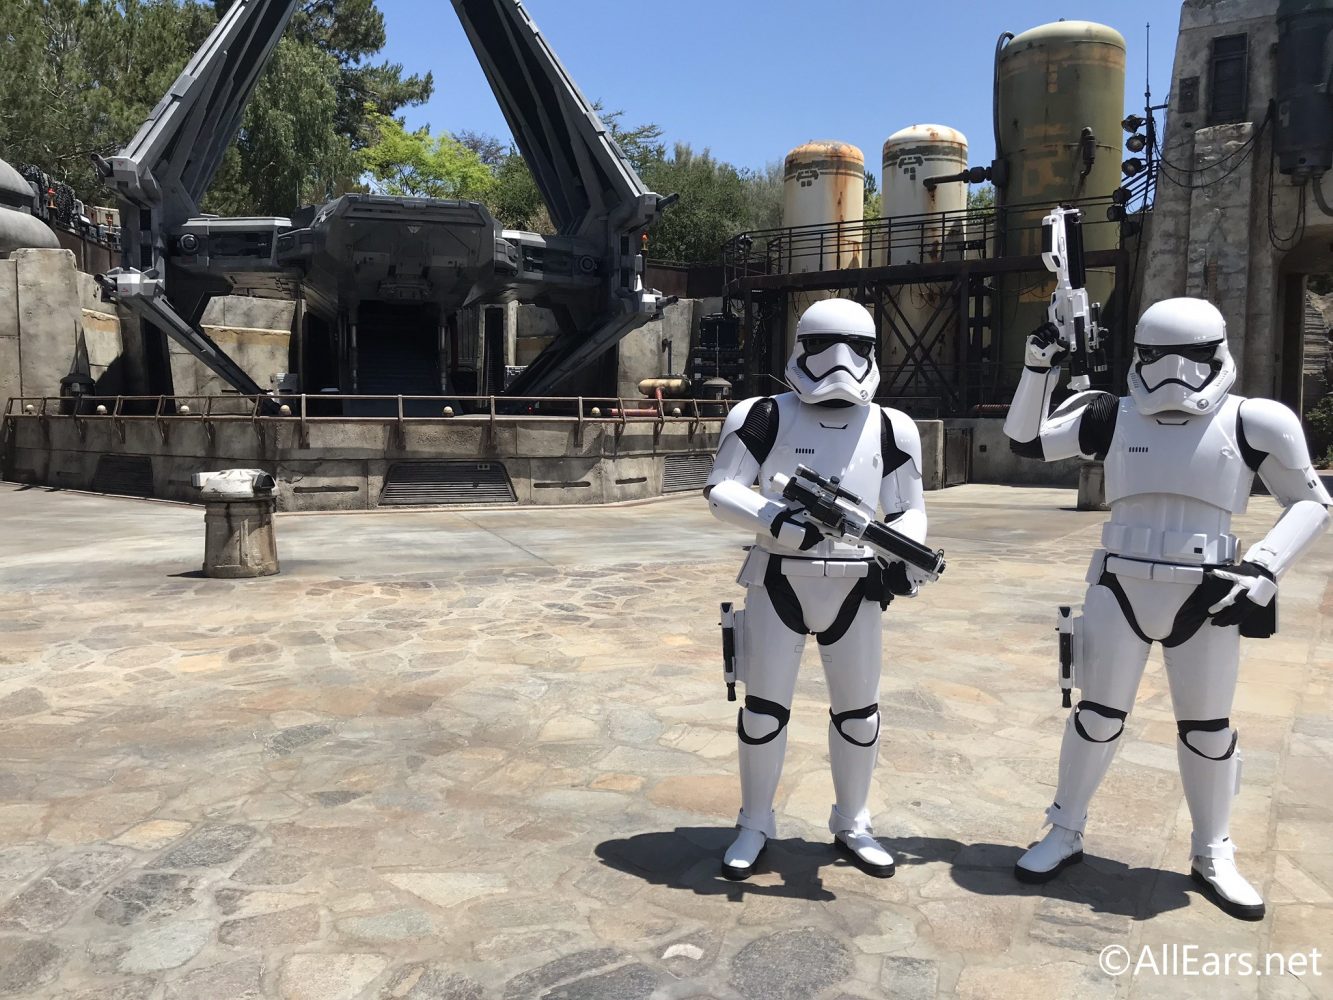 Storm troopers dlr galaxys edge 19 00 3 e1559256560650